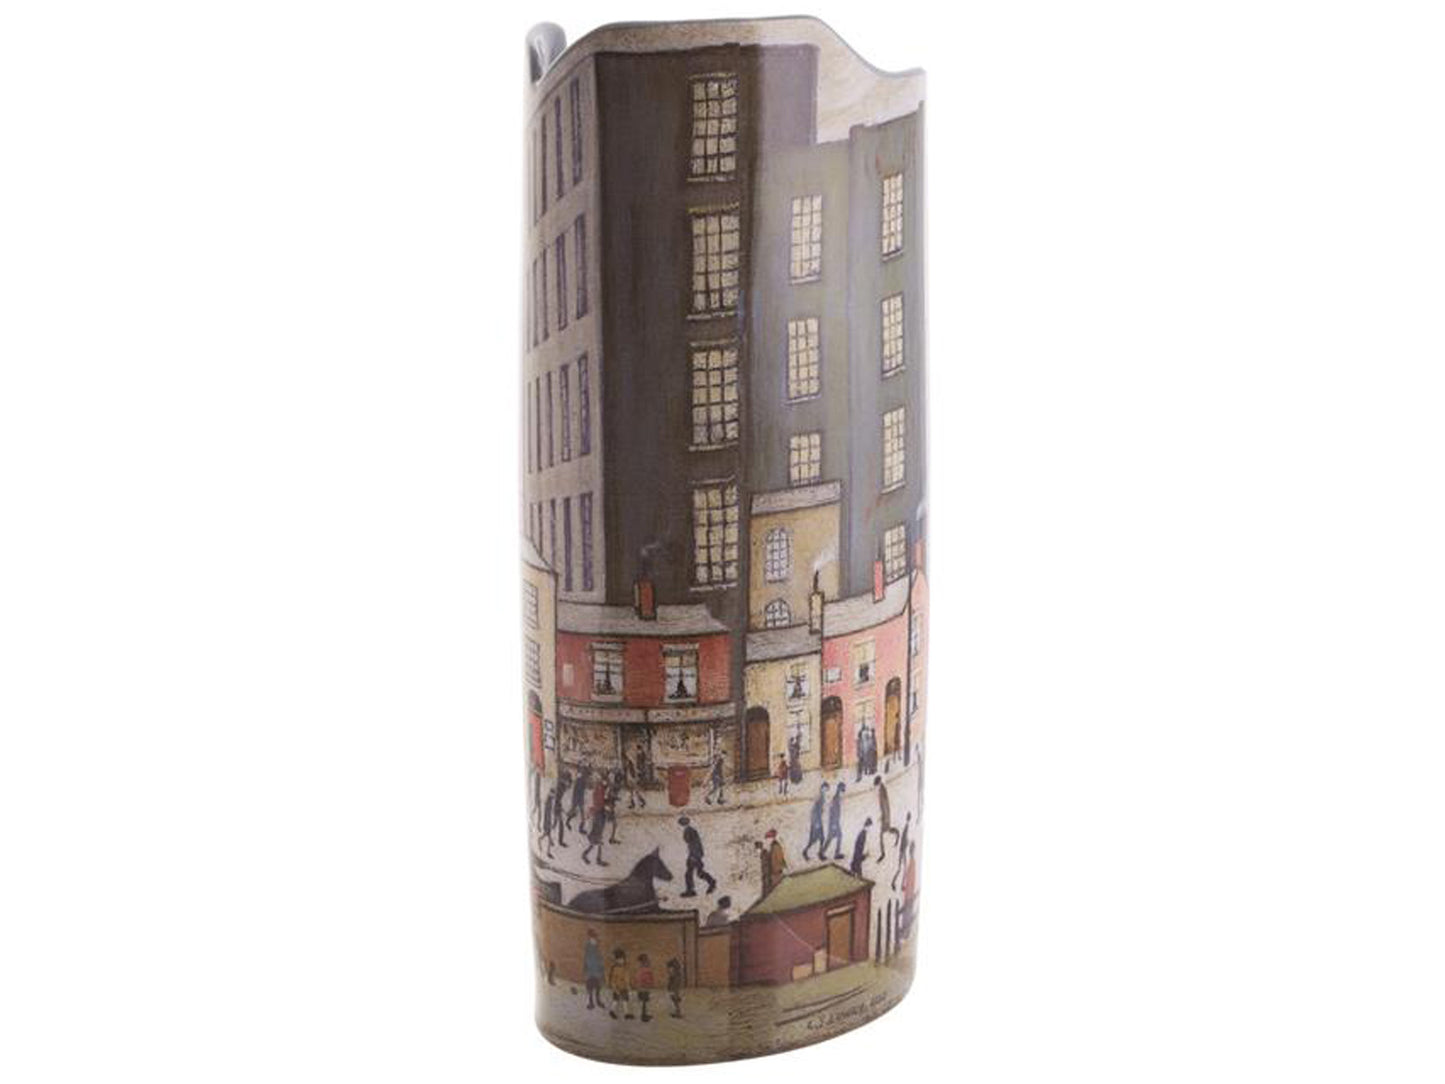 A porcelain vase that has been printed with Lowry's painting 'Coming from the Mill'. Using slightly more muted colours such as greys, whites and blues, this piece has an uneven top edge that slopes up and down to mimic the buildings depicted in the picture. It is an idea size for holding a large bouquet of longer stemmed flowers.